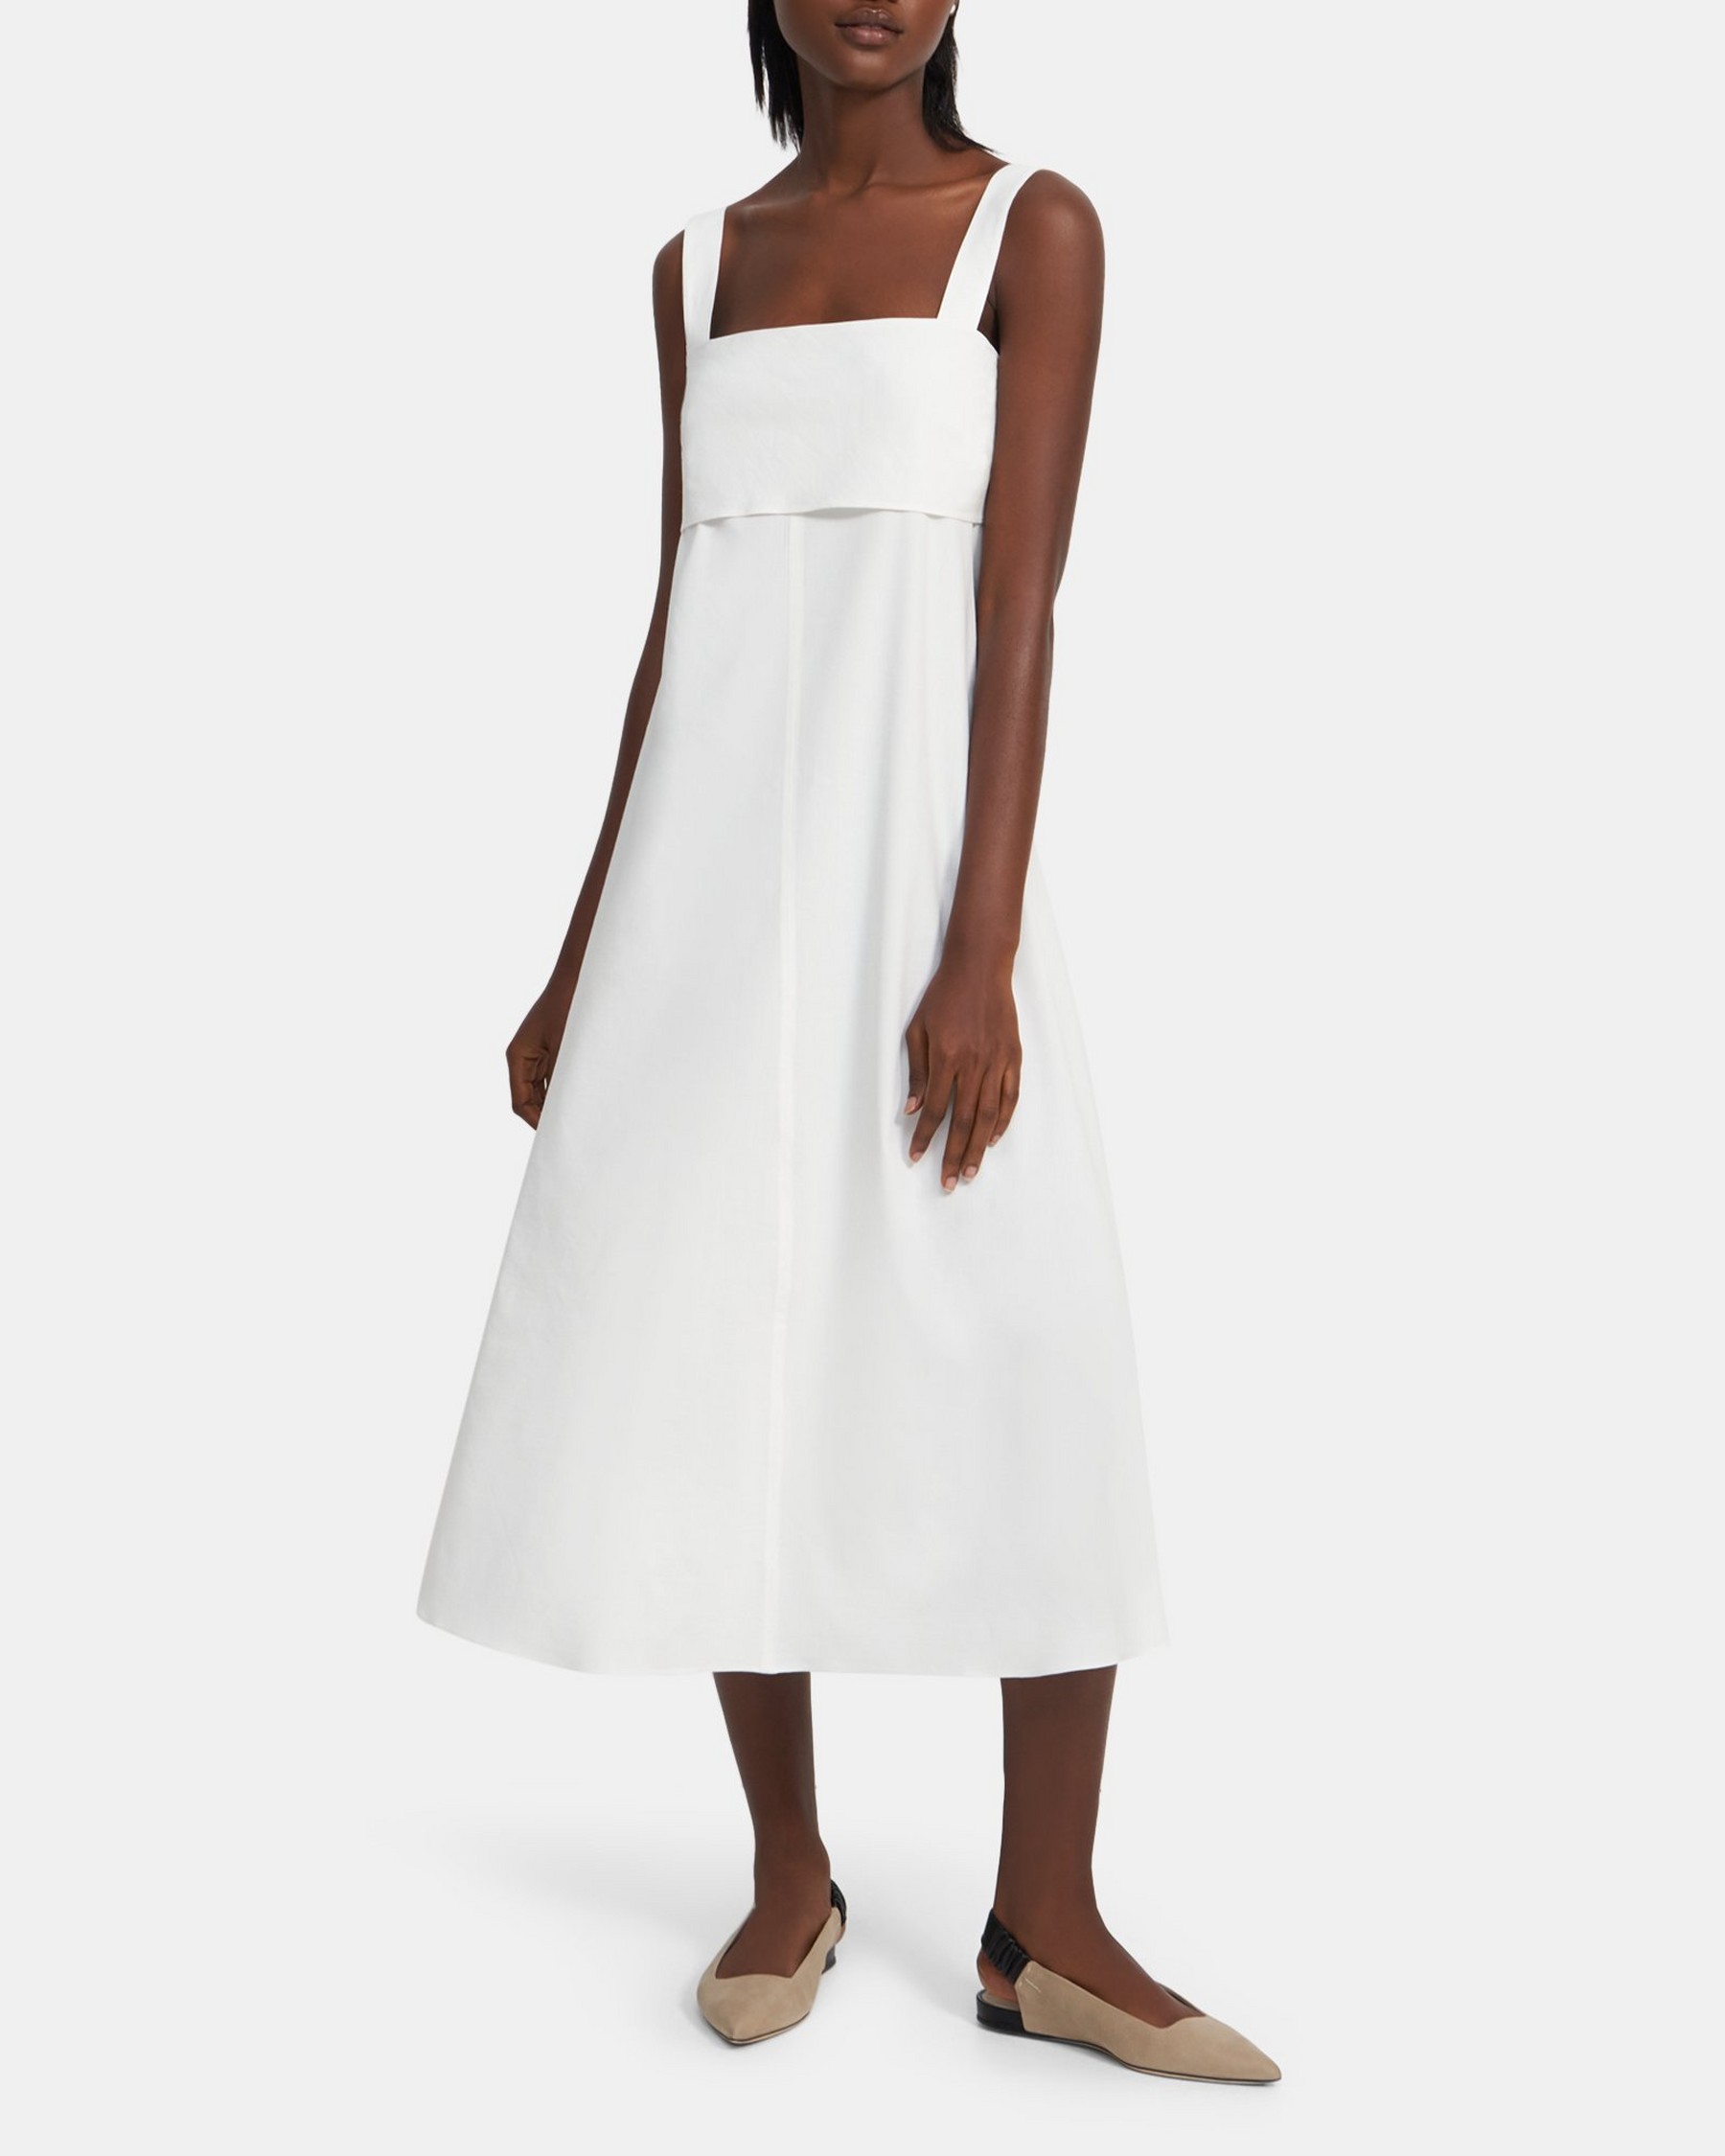 theory.com | Tie-Back Dress in Good Linen